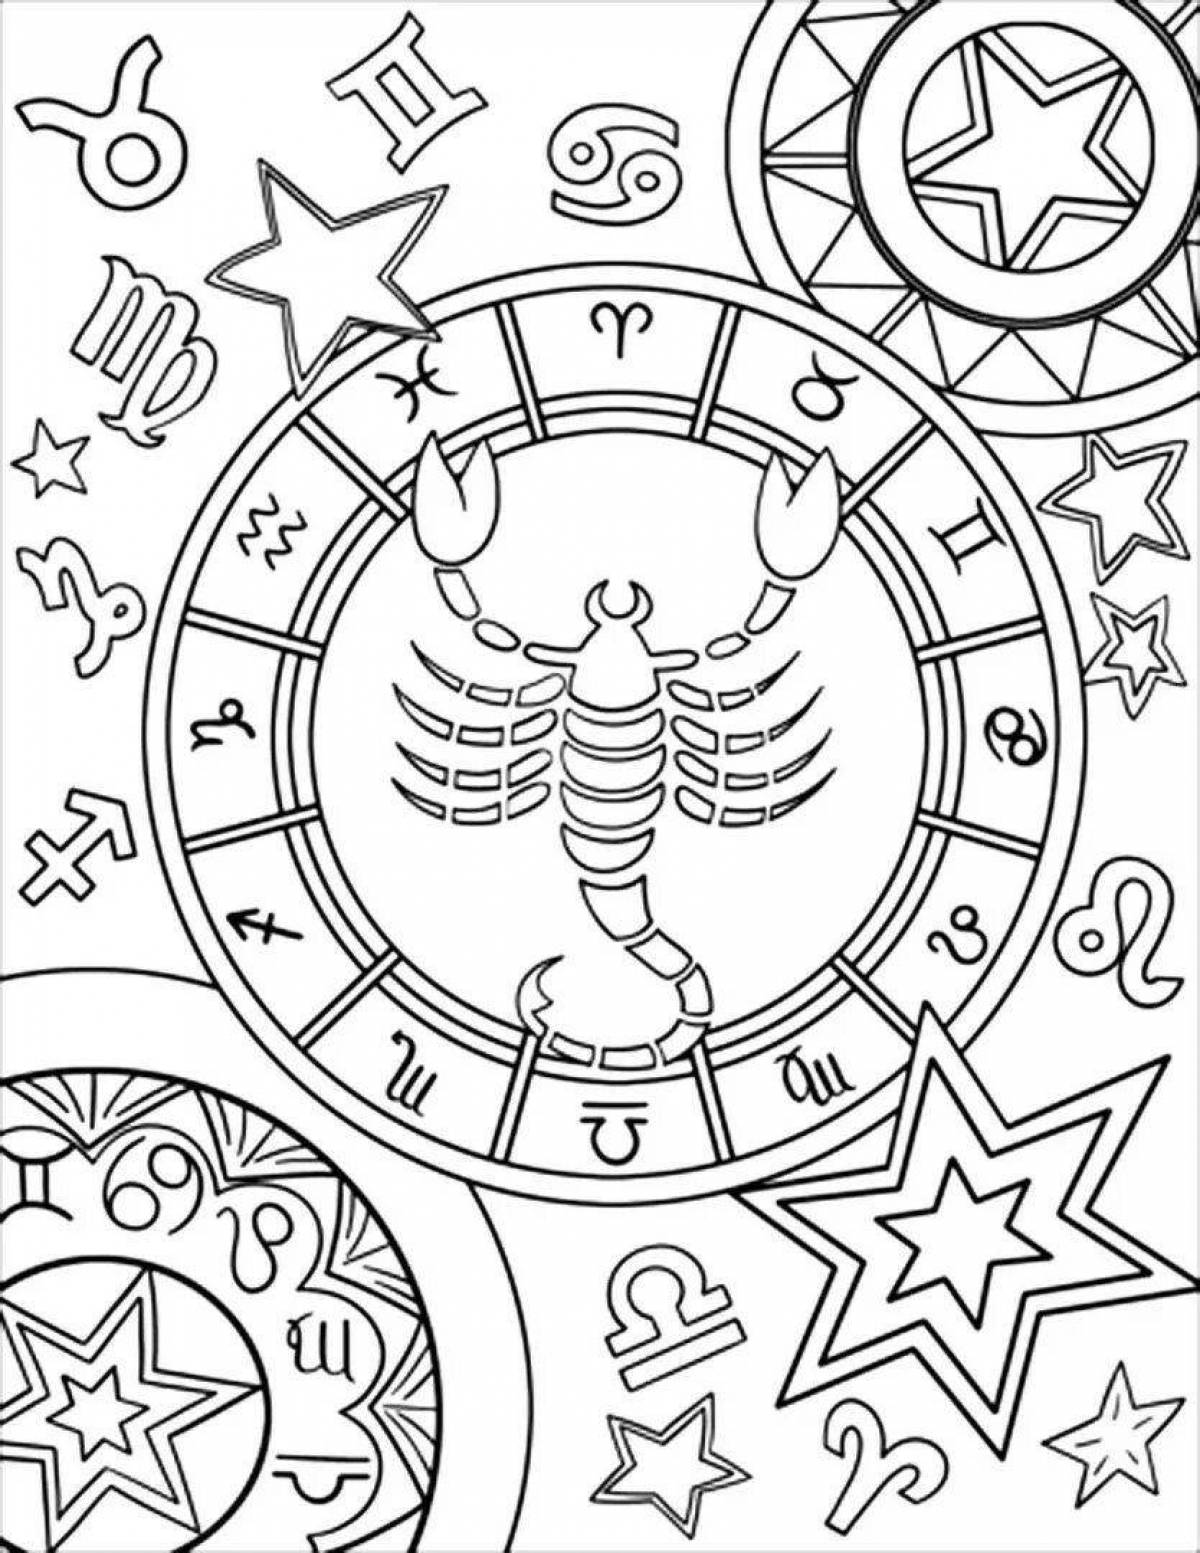 Colorful zodiac signs coloring pages for little artists